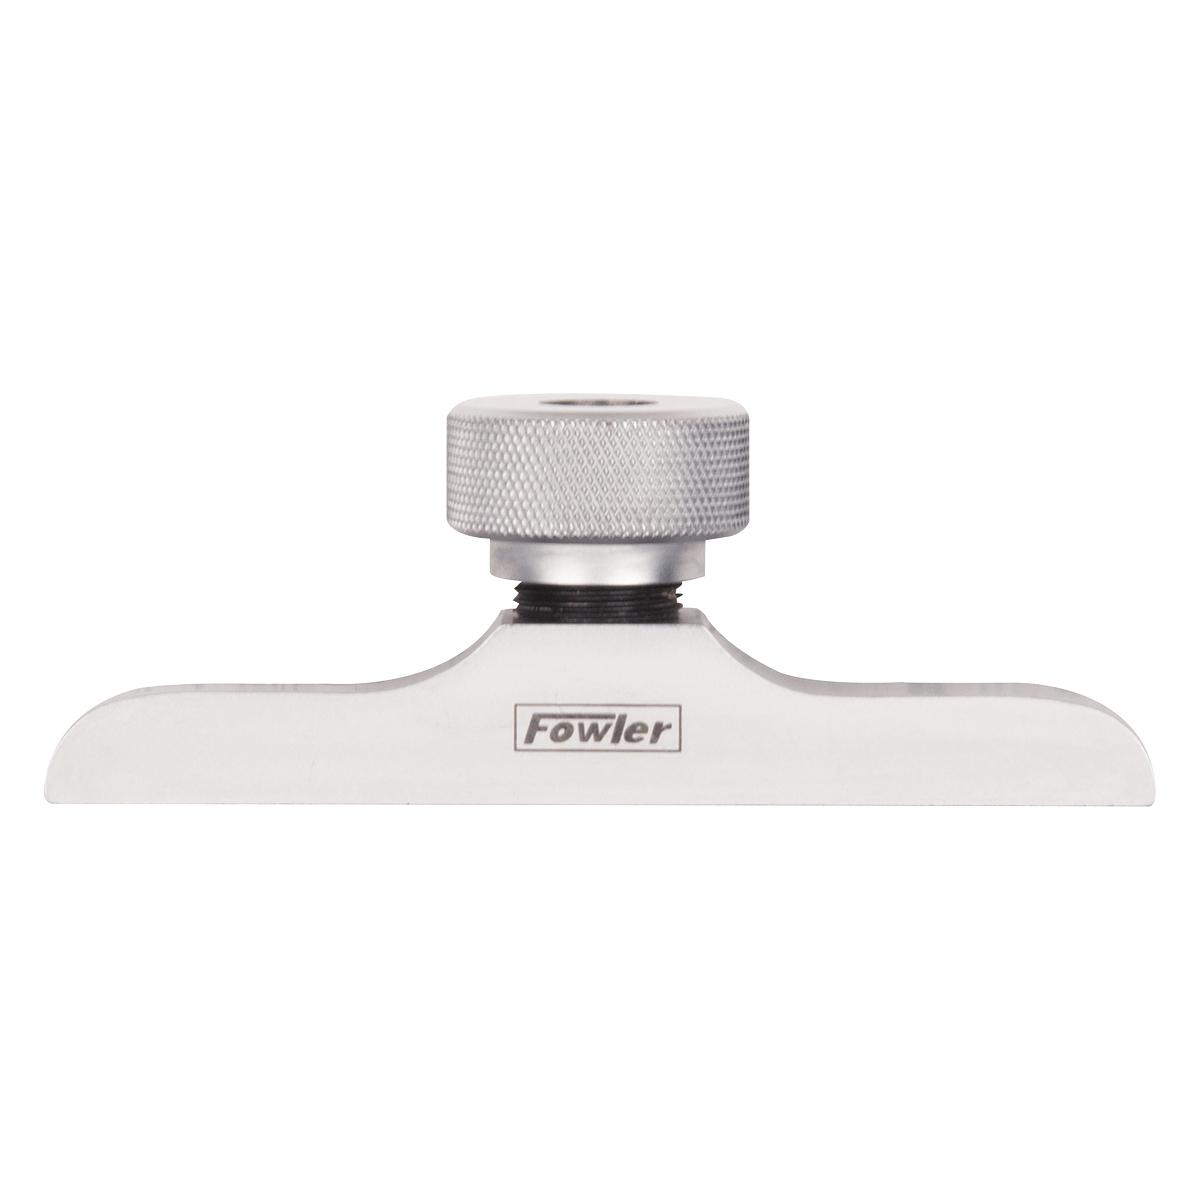 Fowler Full Warranty 52-565-700-0 T-Bar Depth Base Attachment for Fits Most 6 and 8 Caliper 3 Width 